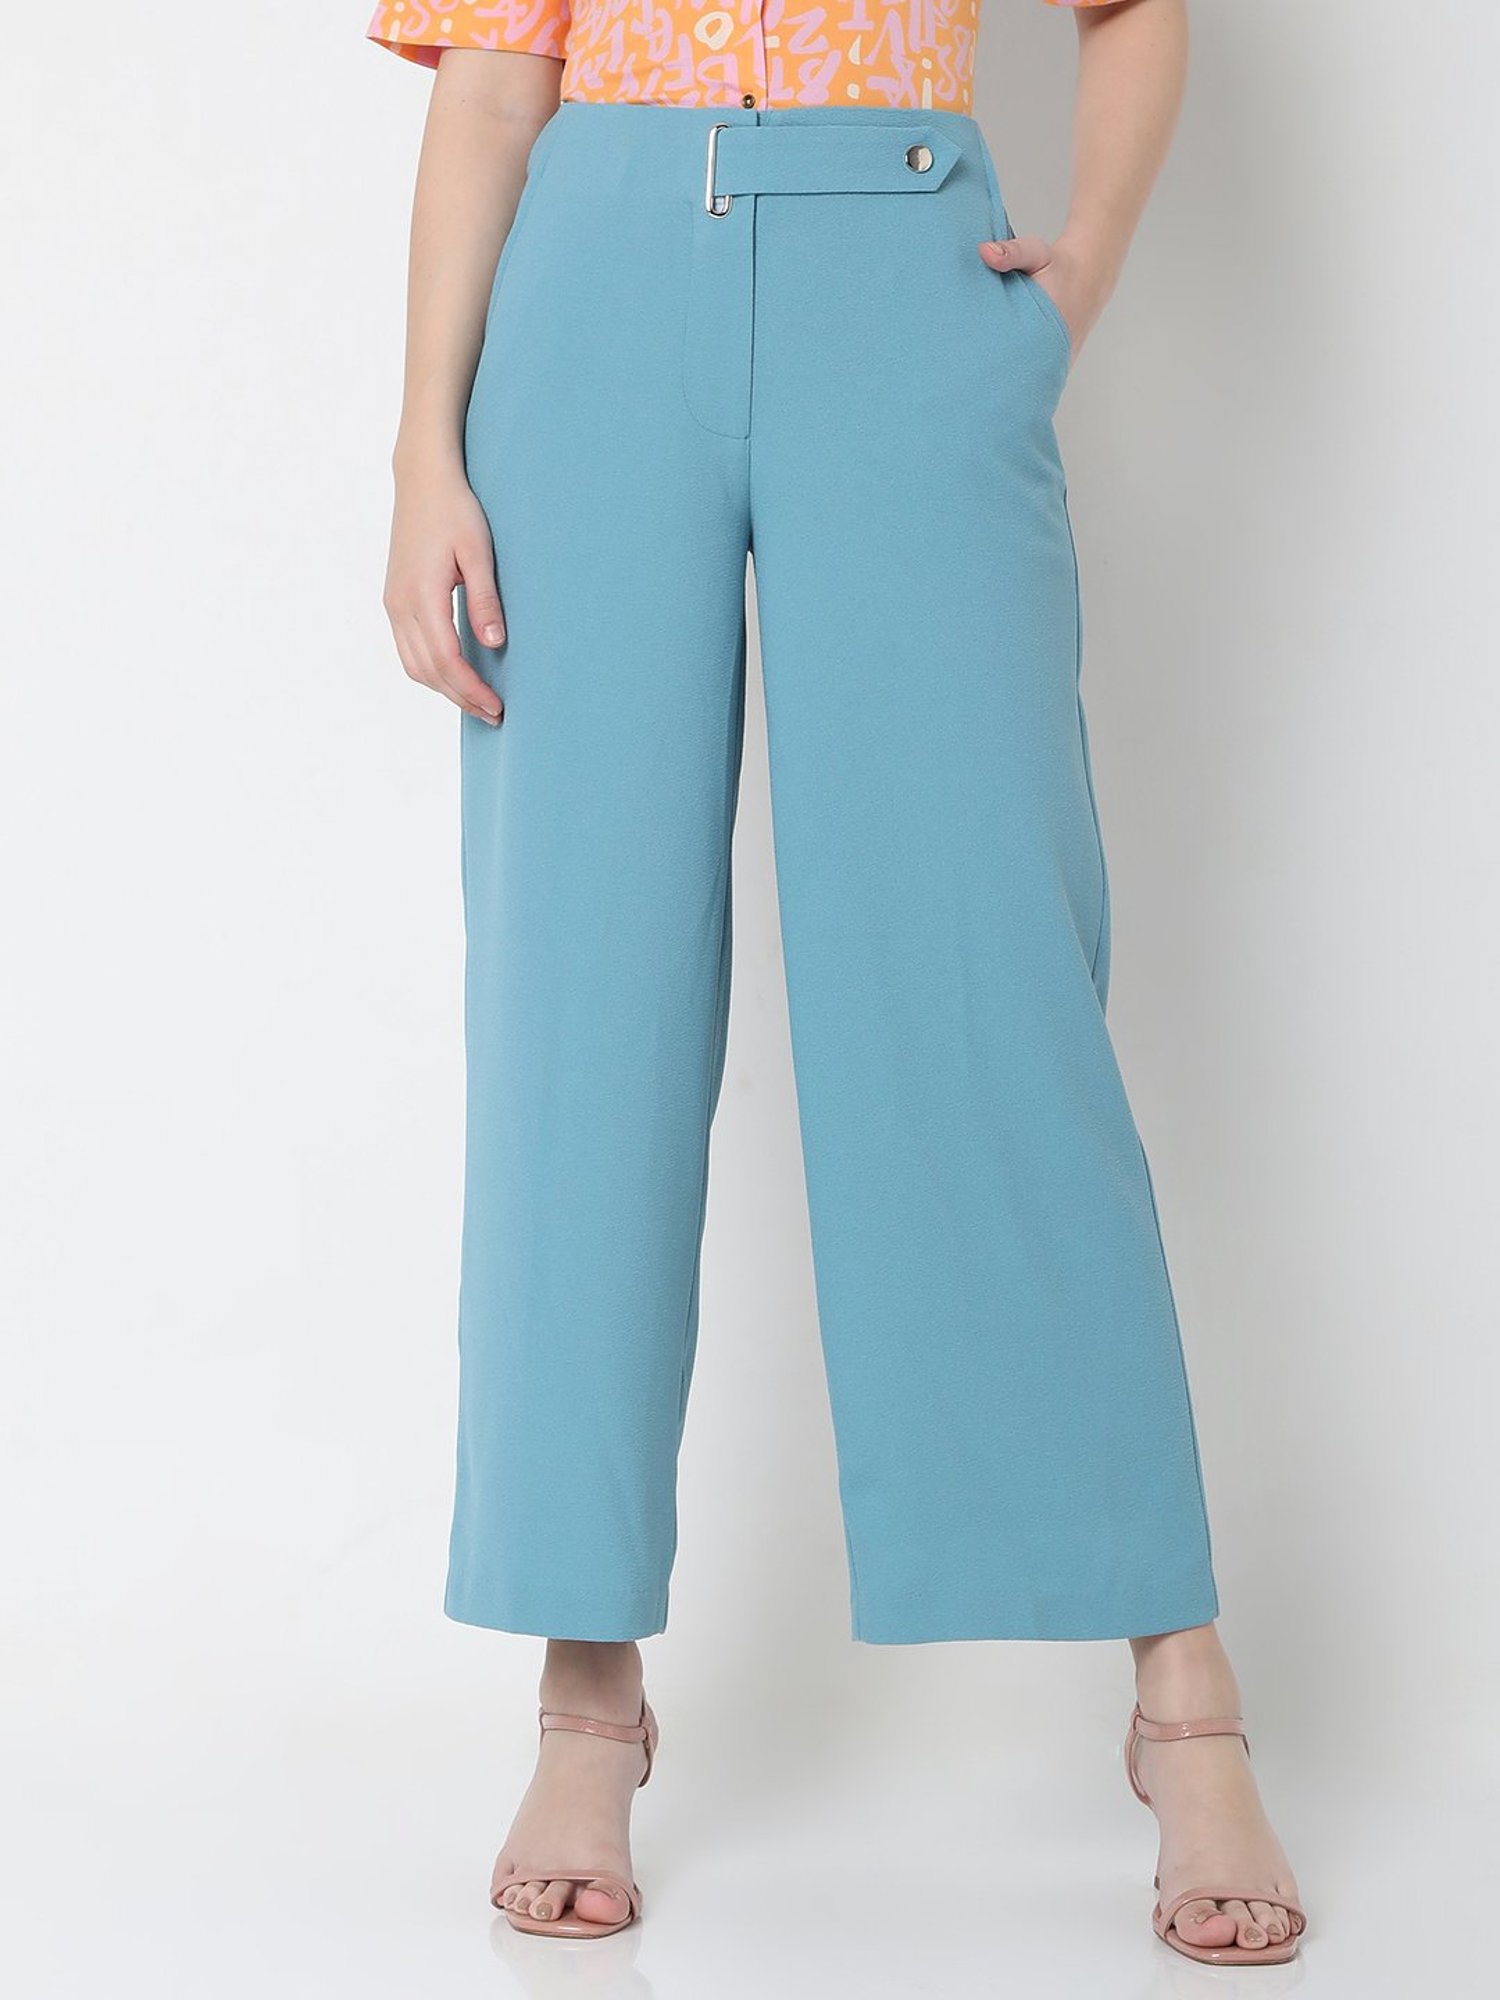 Women Solid White & Sky Blue Rayon Palazzo (Pack Of 2) at Rs 1019 | New  Delhi| ID: 2849521086230